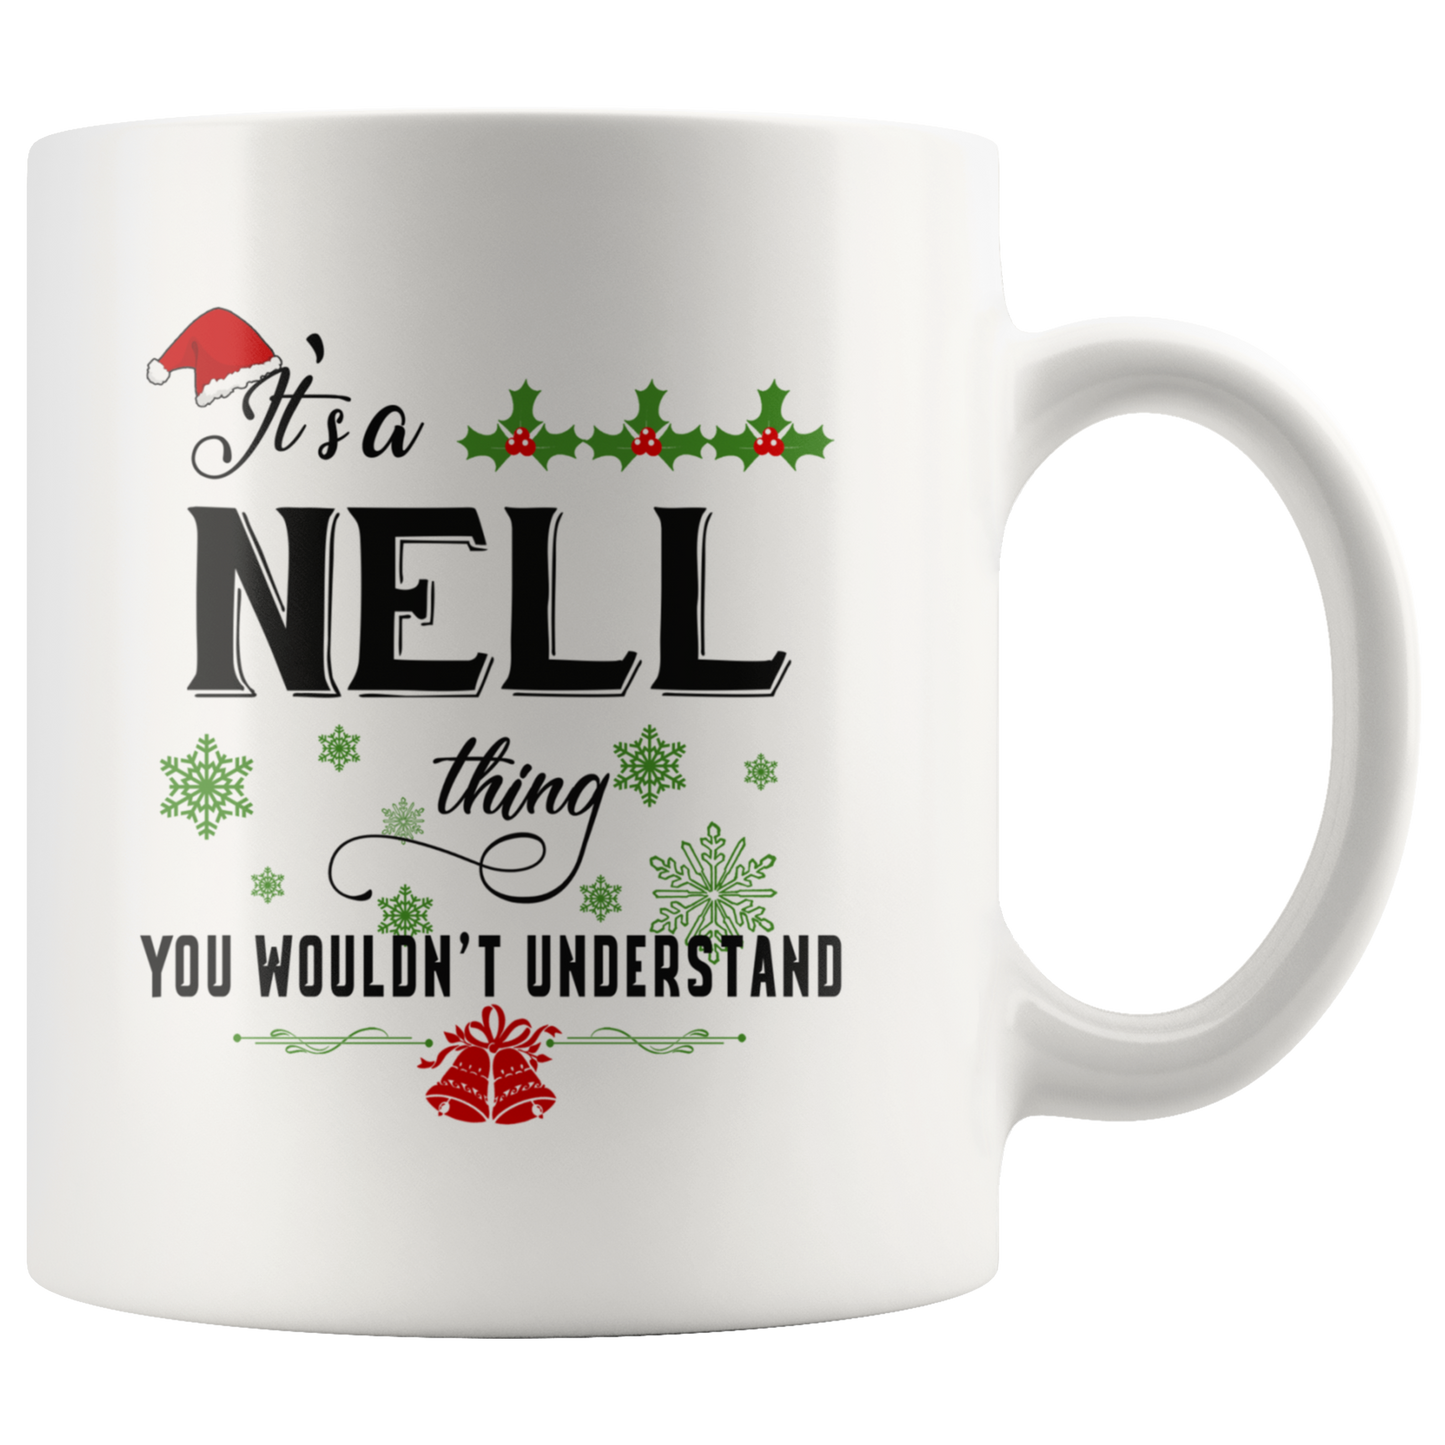 M-20321872-sp-16894 - Christmas Mug for Nell- Its a Nell Thing You Wouldnt Underst